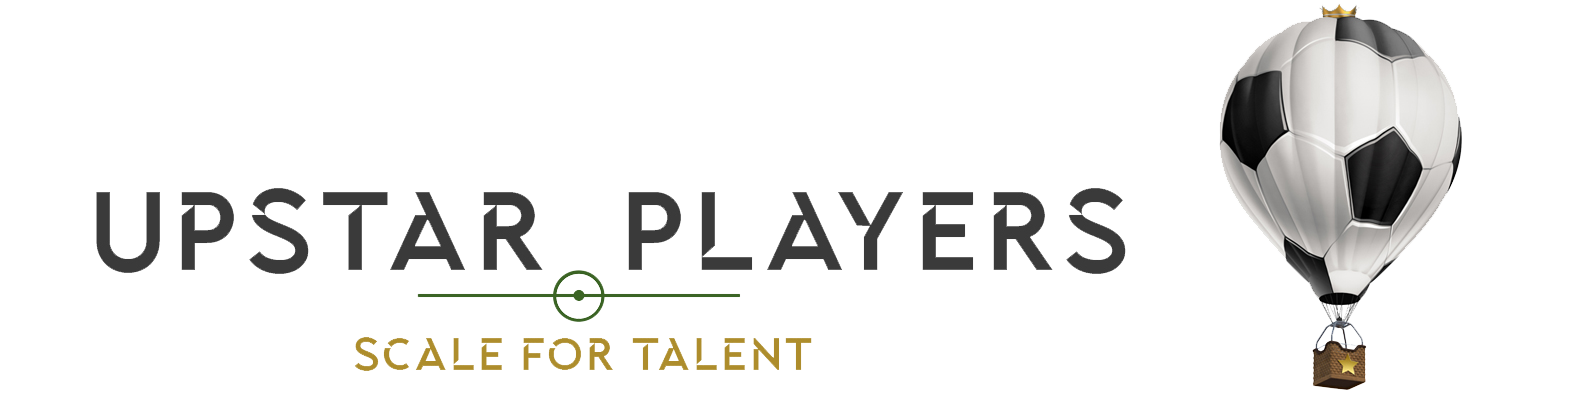 UPSTARPLAYERS Club - Scale for Talent